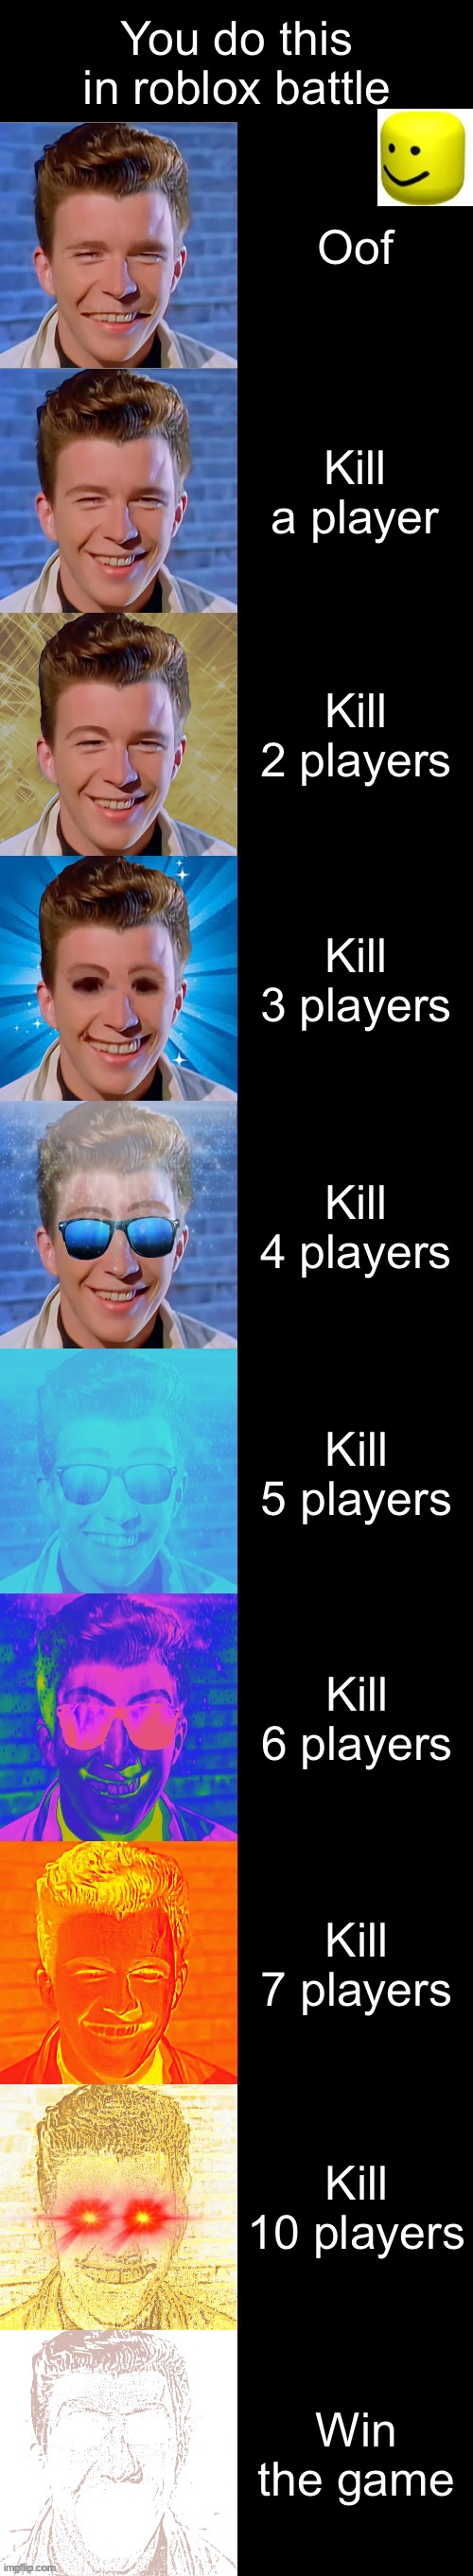 Rick astley becoming canny you did this in a roblox battle | You do this in roblox battle; Oof; Kill a player; Kill 2 players; Kill 3 players; Kill 4 players; Kill 5 players; Kill 6 players; Kill 7 players; Kill 10 players; Win the game | image tagged in rick astley becoming canny | made w/ Imgflip meme maker